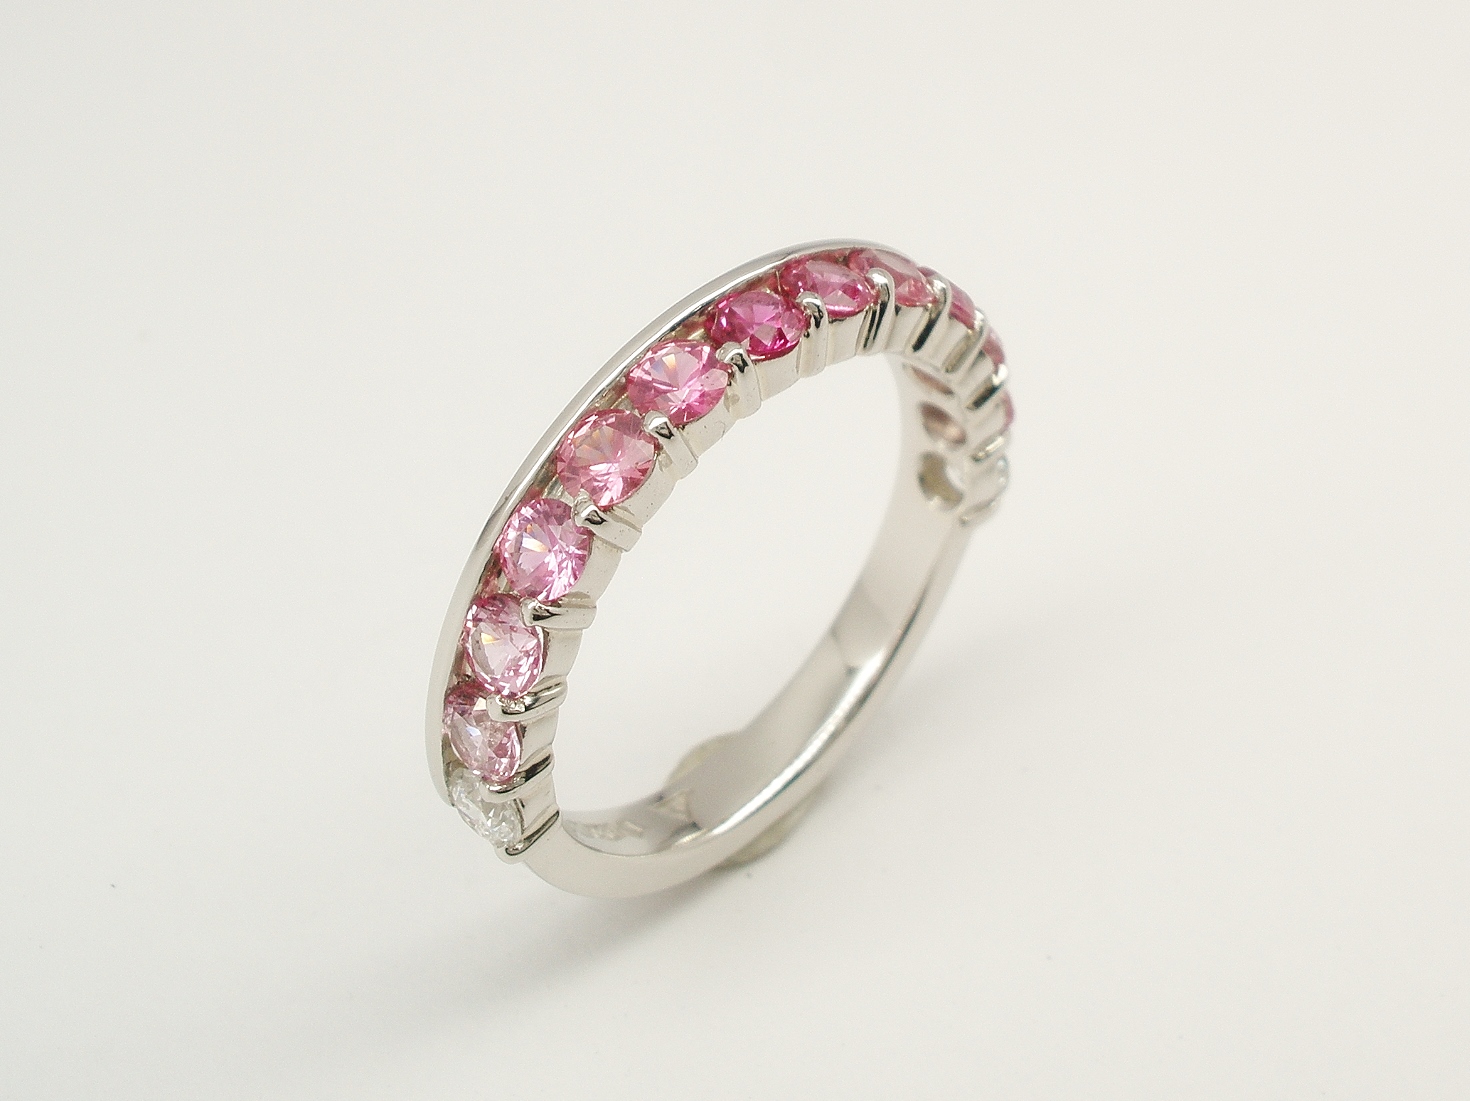 A 13 stone round pink sapphire and brilliant cut diamond ring mounted in platinum. The 11 sapphires graduate in hue from deep colour in the centre to paler around the ring. The sapphires are framed on either side by a single diamond.